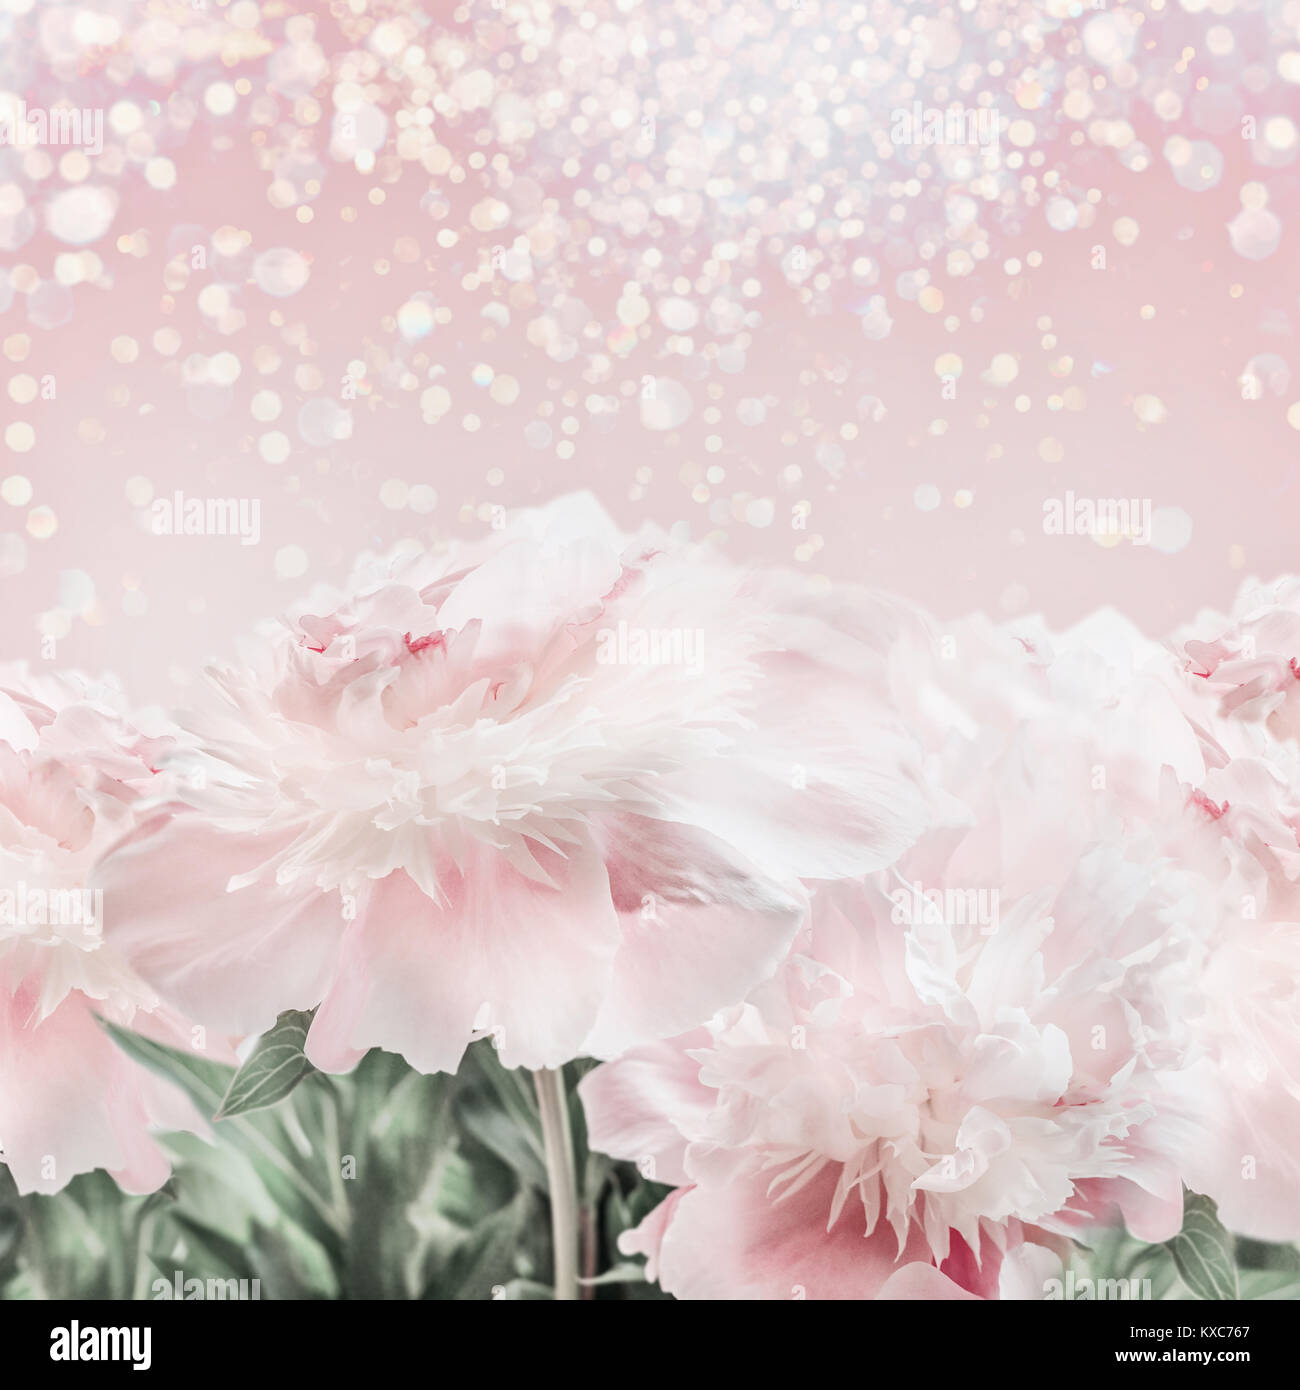 Pastel pink peonies floral background with bokeh. Layout or greeting card for Mothers day, wedding or happy event Stock Photo